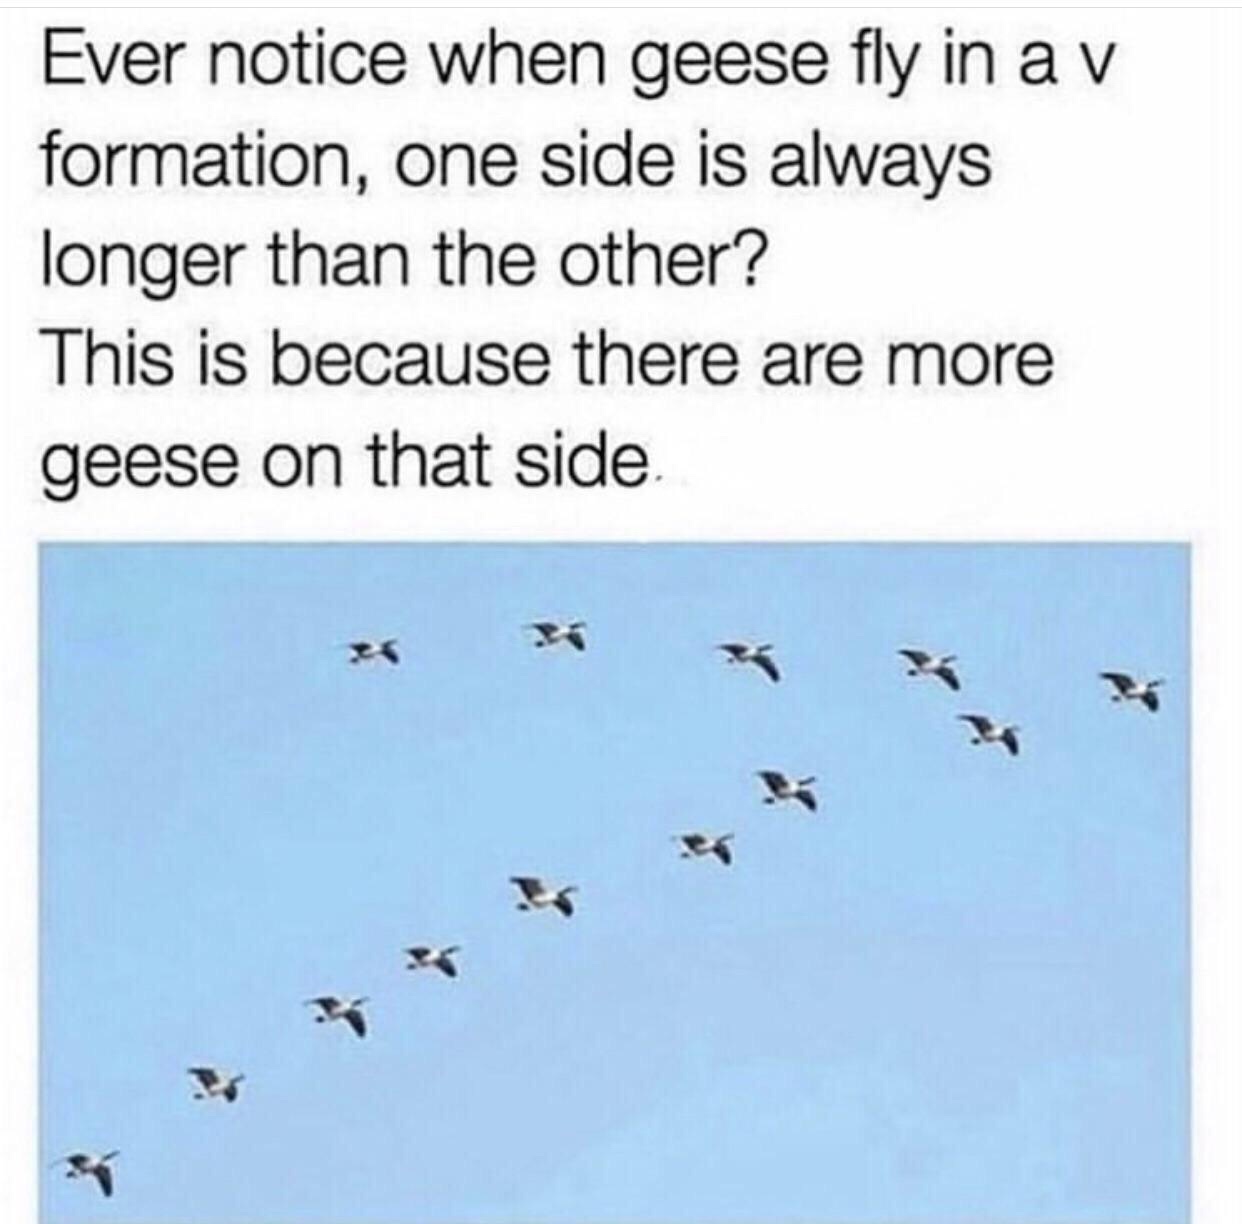 birds fly in v meme - Ever notice when geese fly in a v formation, one side is always longer than the other? This is because there are more geese on that side.